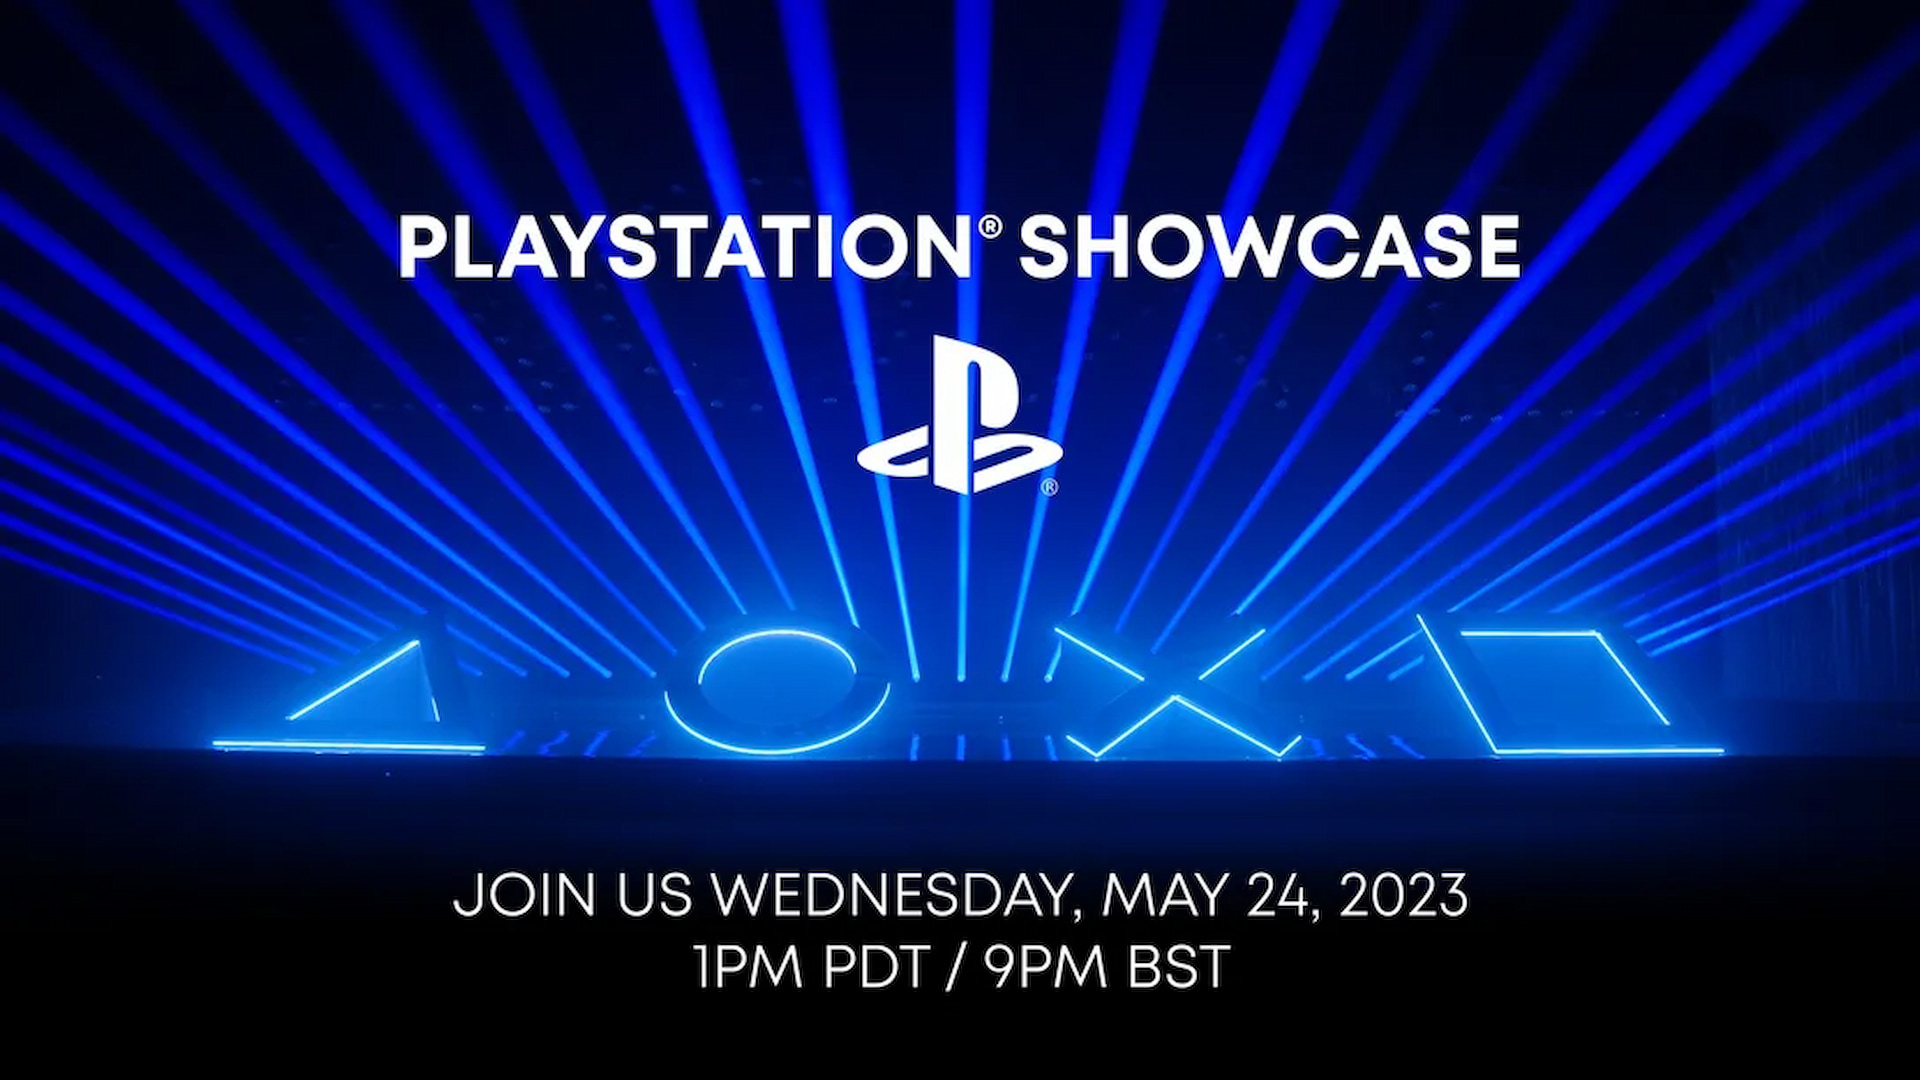 Next PlayStation Showcase Set For May 24, Sony Announces Insider Gaming